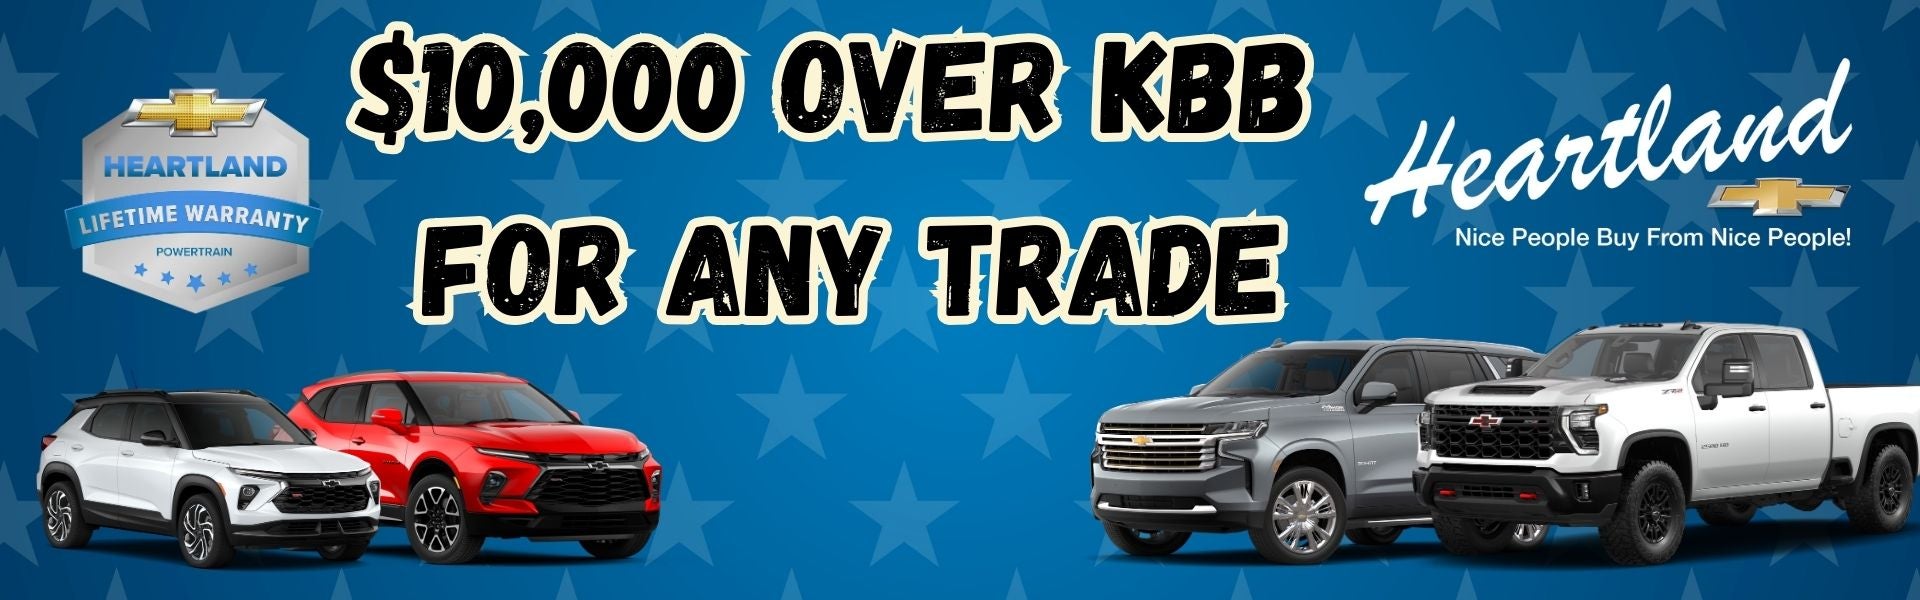 $10,000 over KBB for any trade 